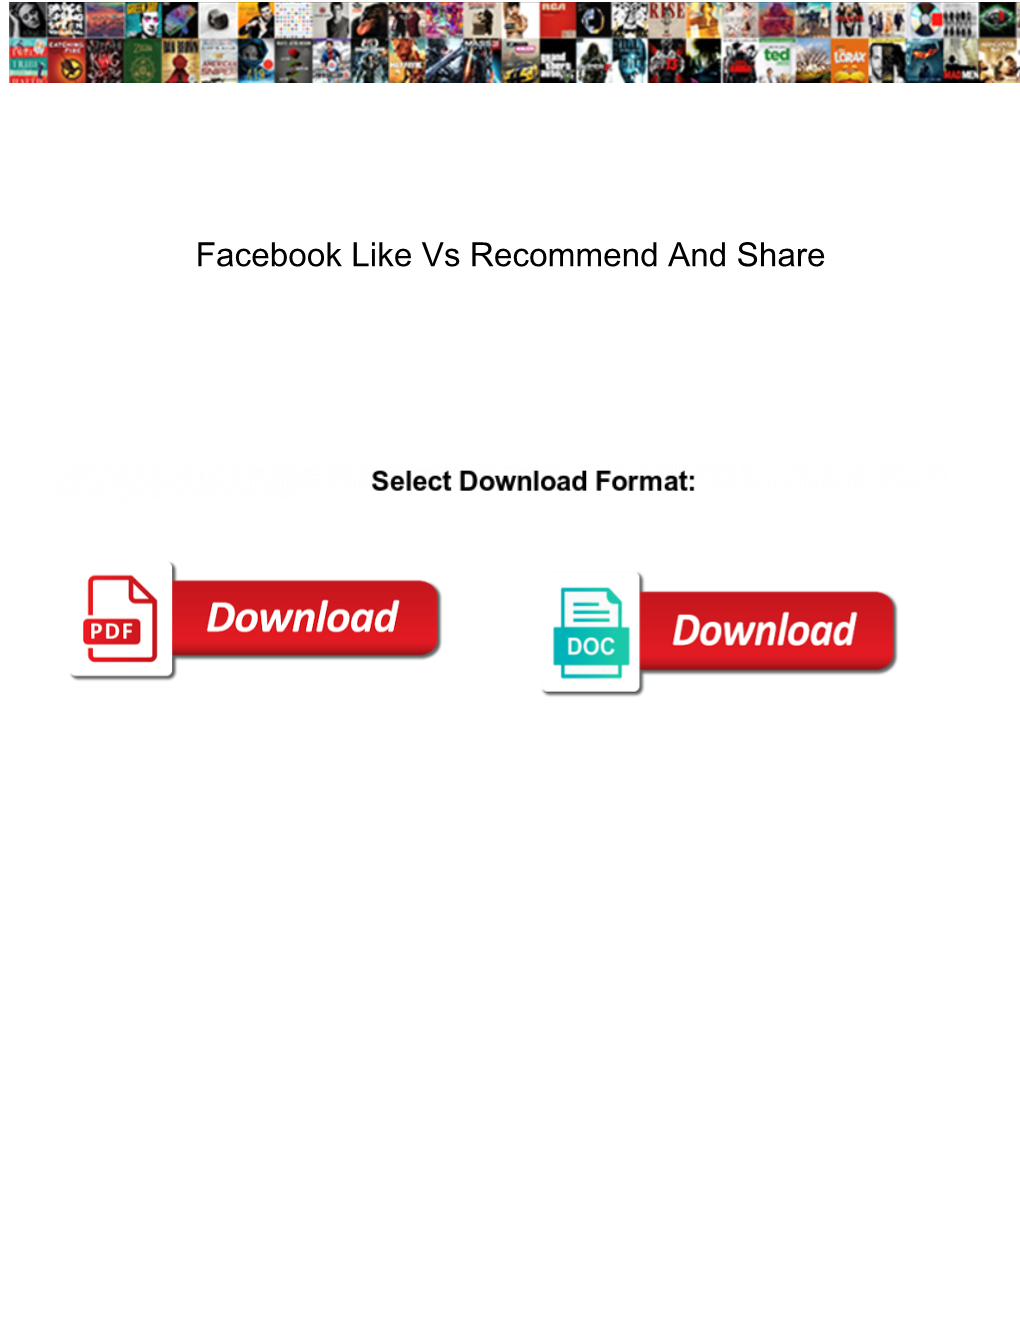 Facebook Like Vs Recommend and Share